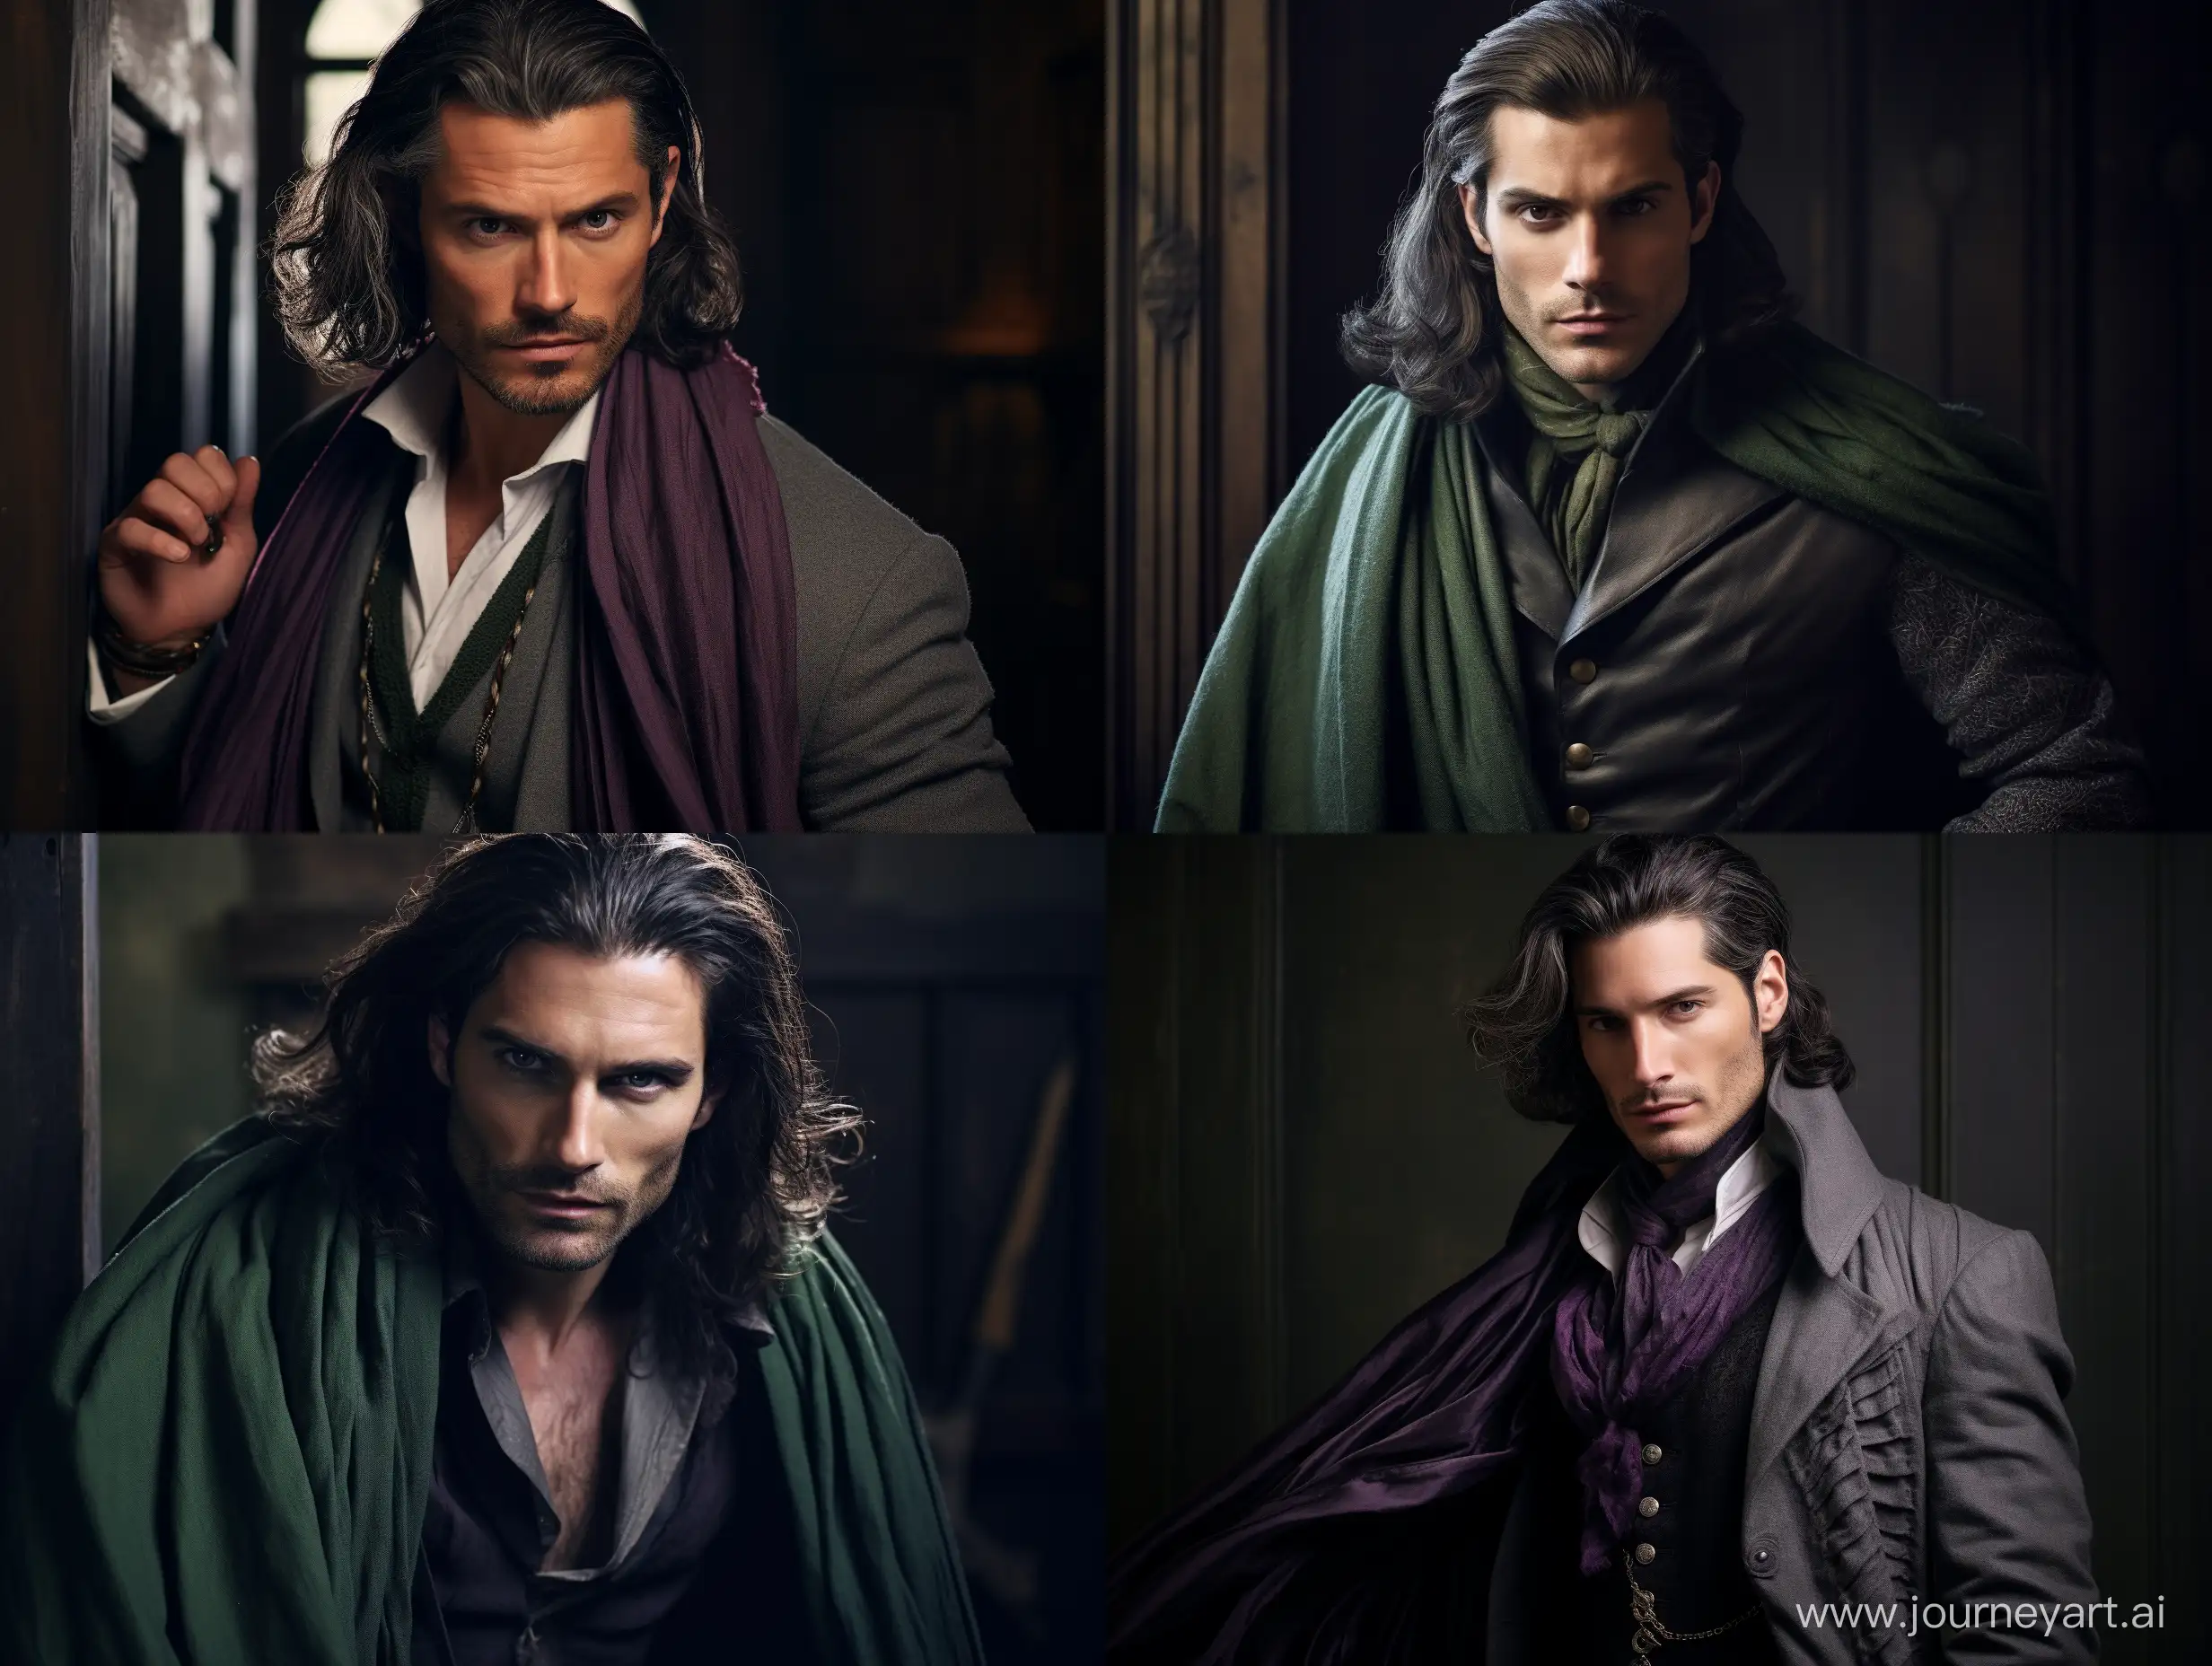 Enigmatic-Medieval-Mage-with-Long-Dark-Hair-and-Persuasive-Green-Eyes